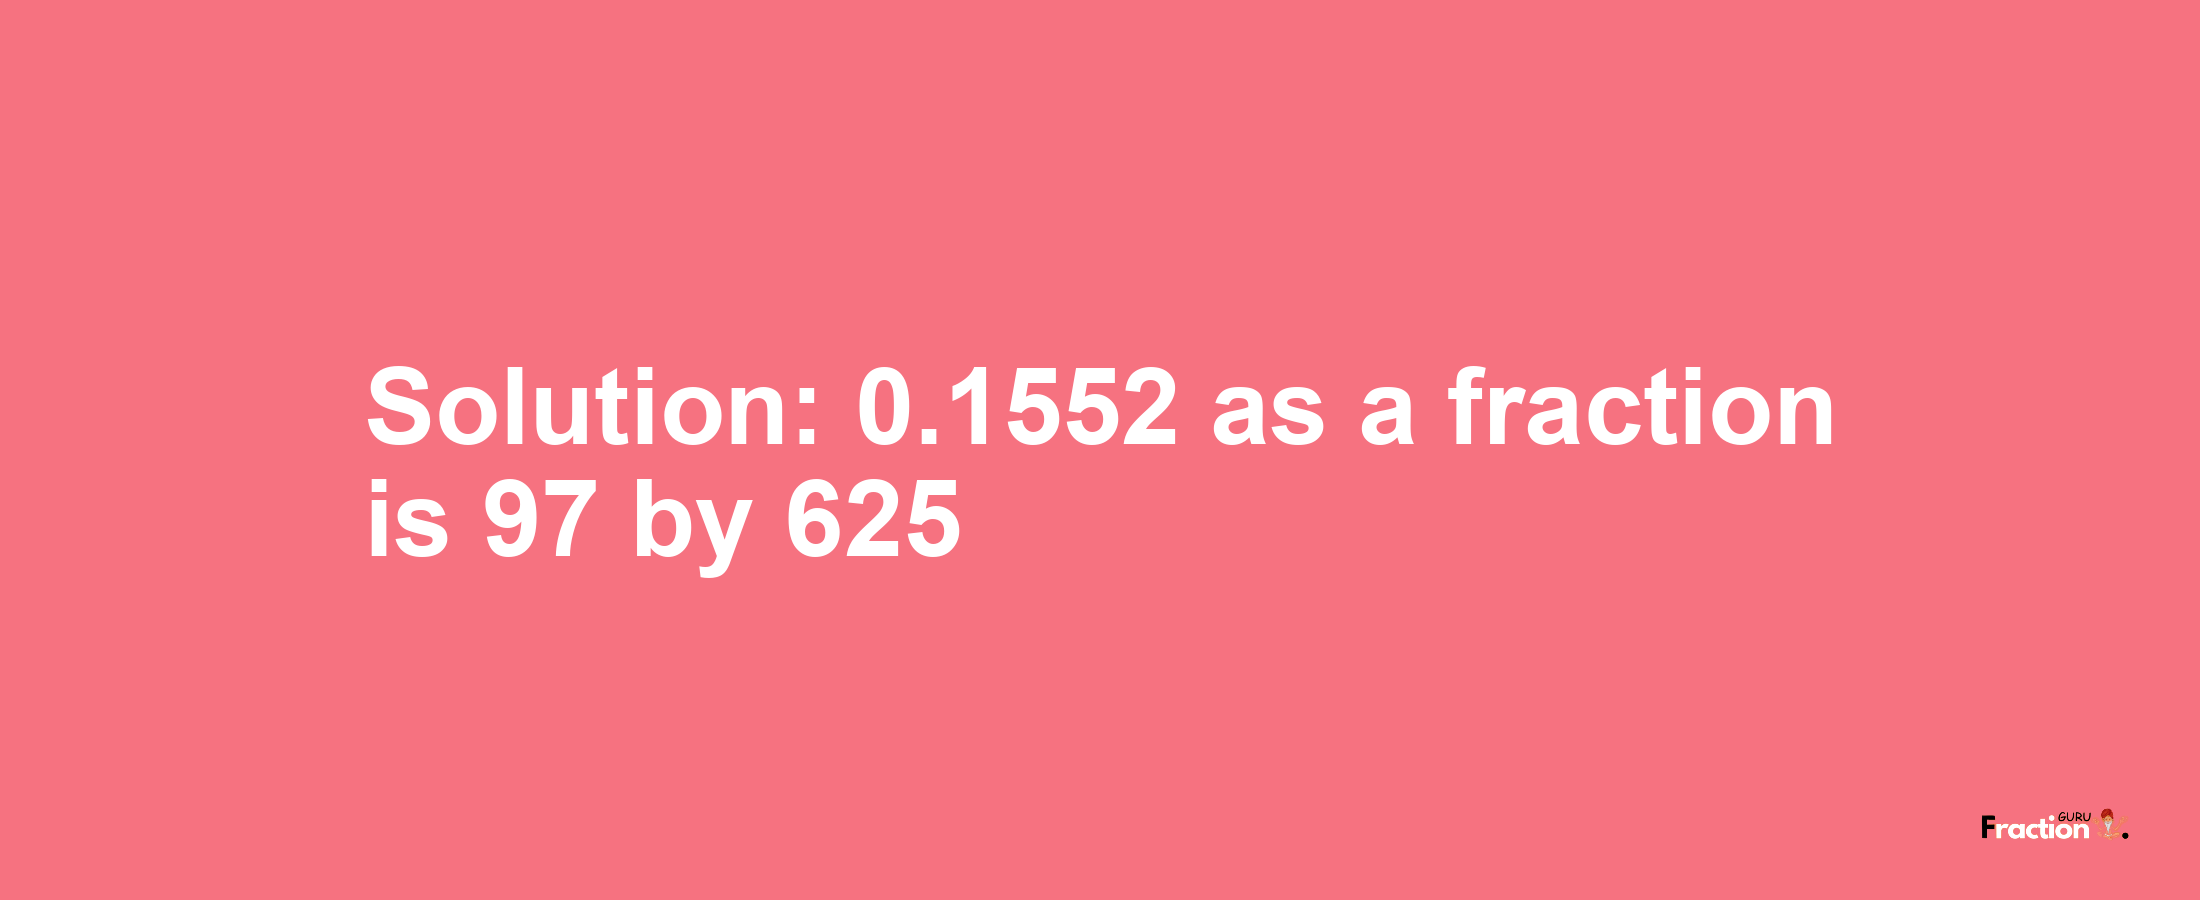 Solution:0.1552 as a fraction is 97/625